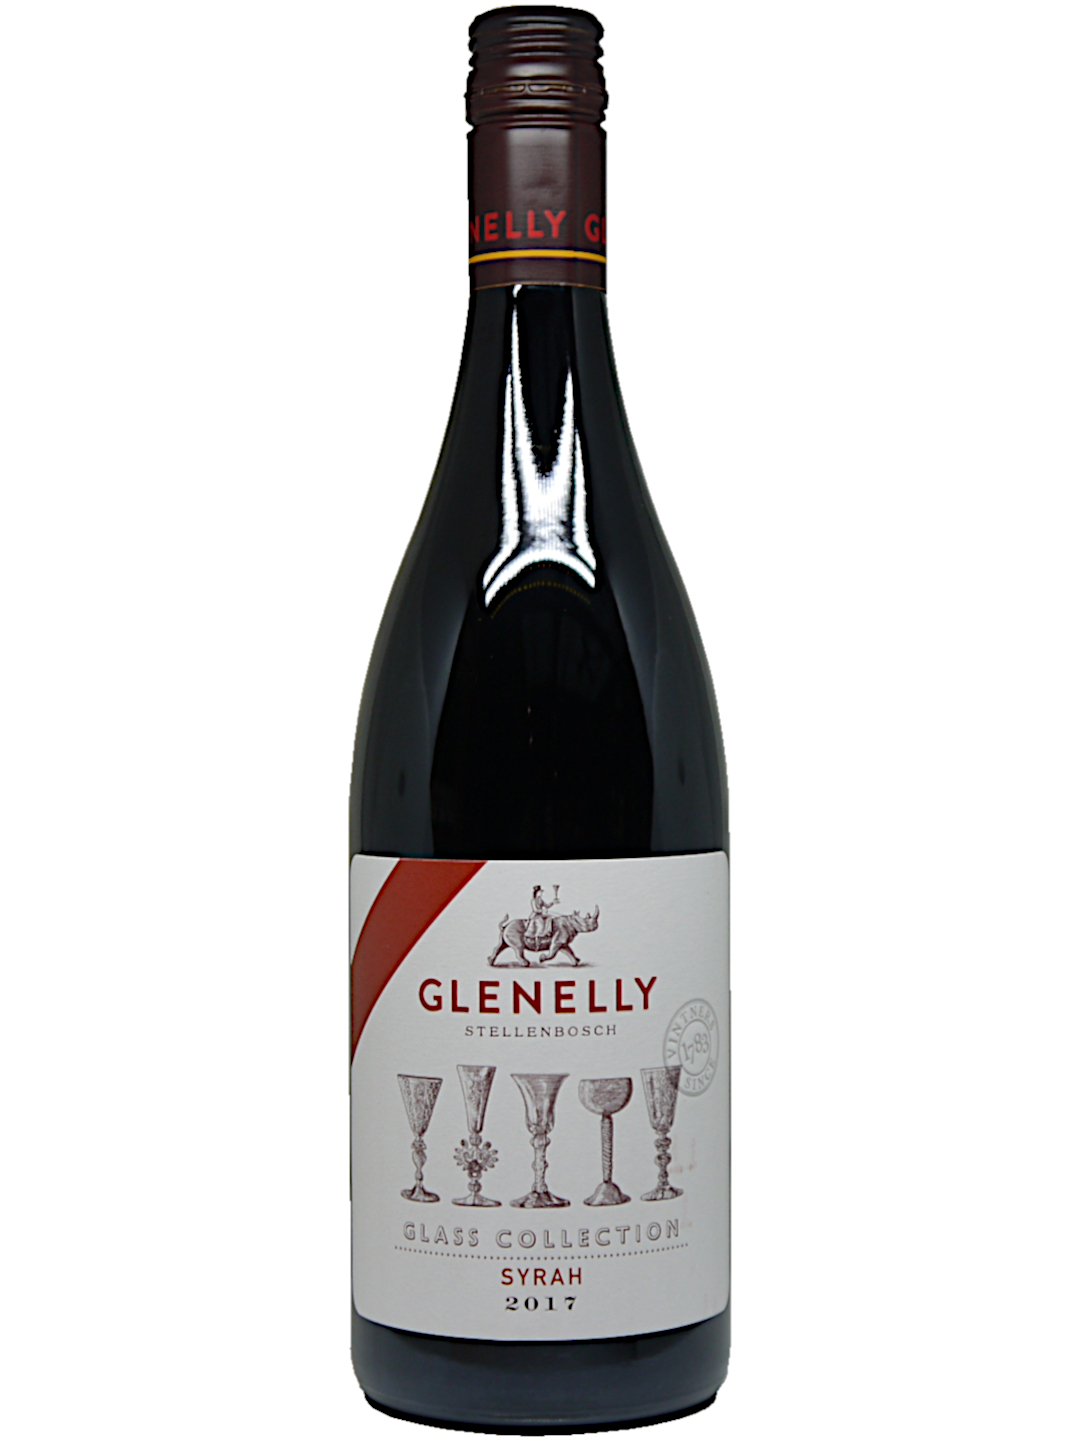 Glenelly Glass Collection Syrah